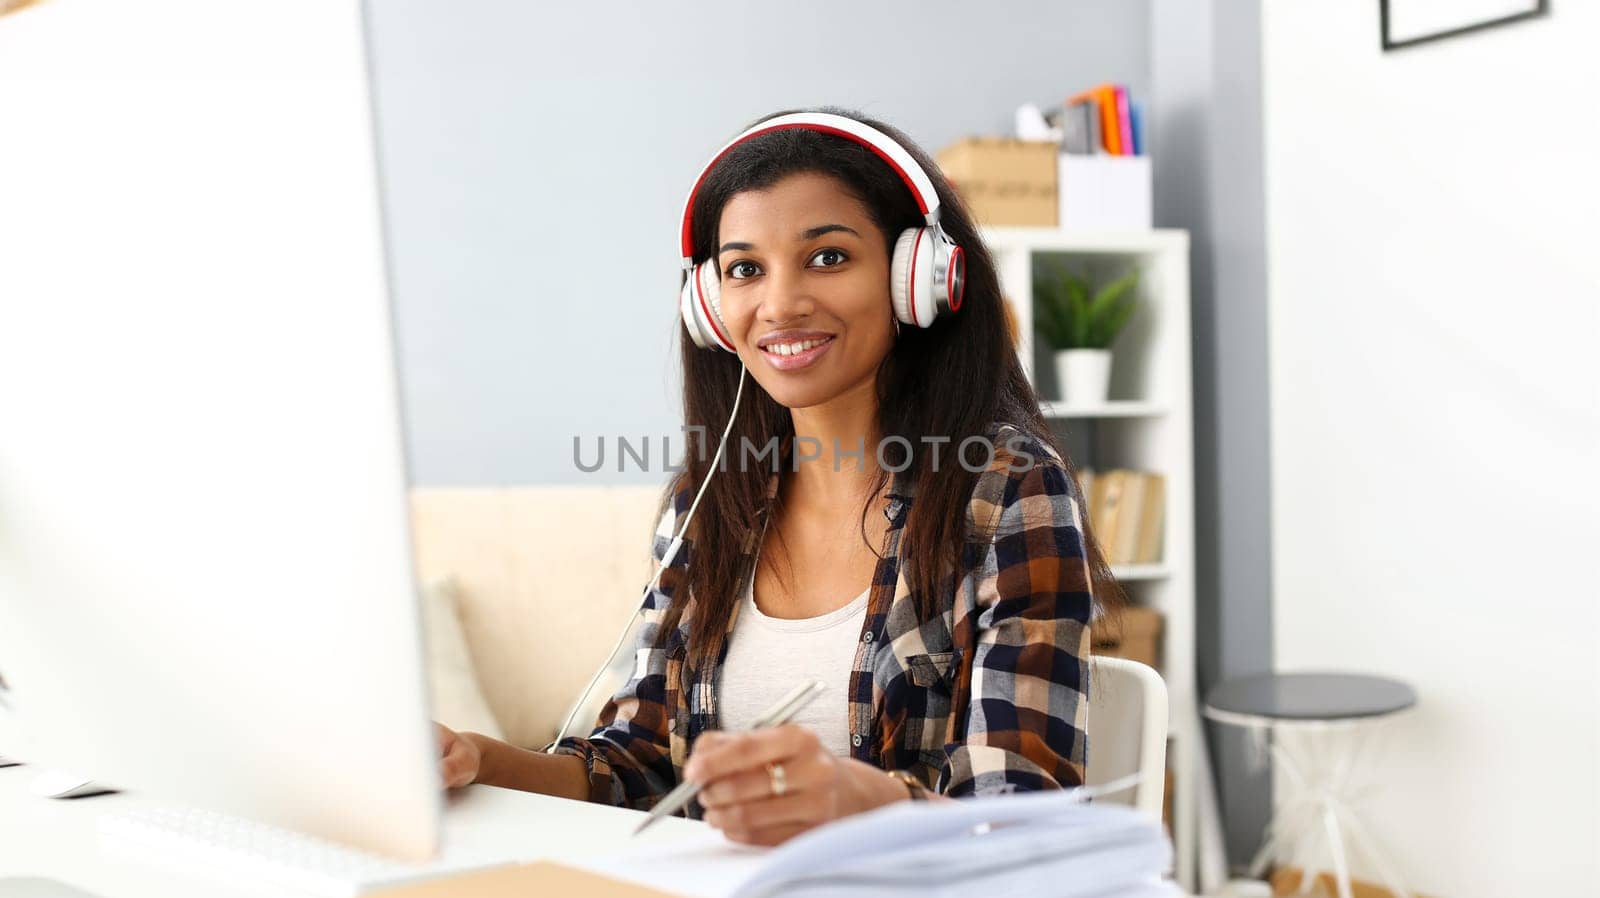 Black smiling woman sitting at workplace wearing headphones studying or doing school homework concept